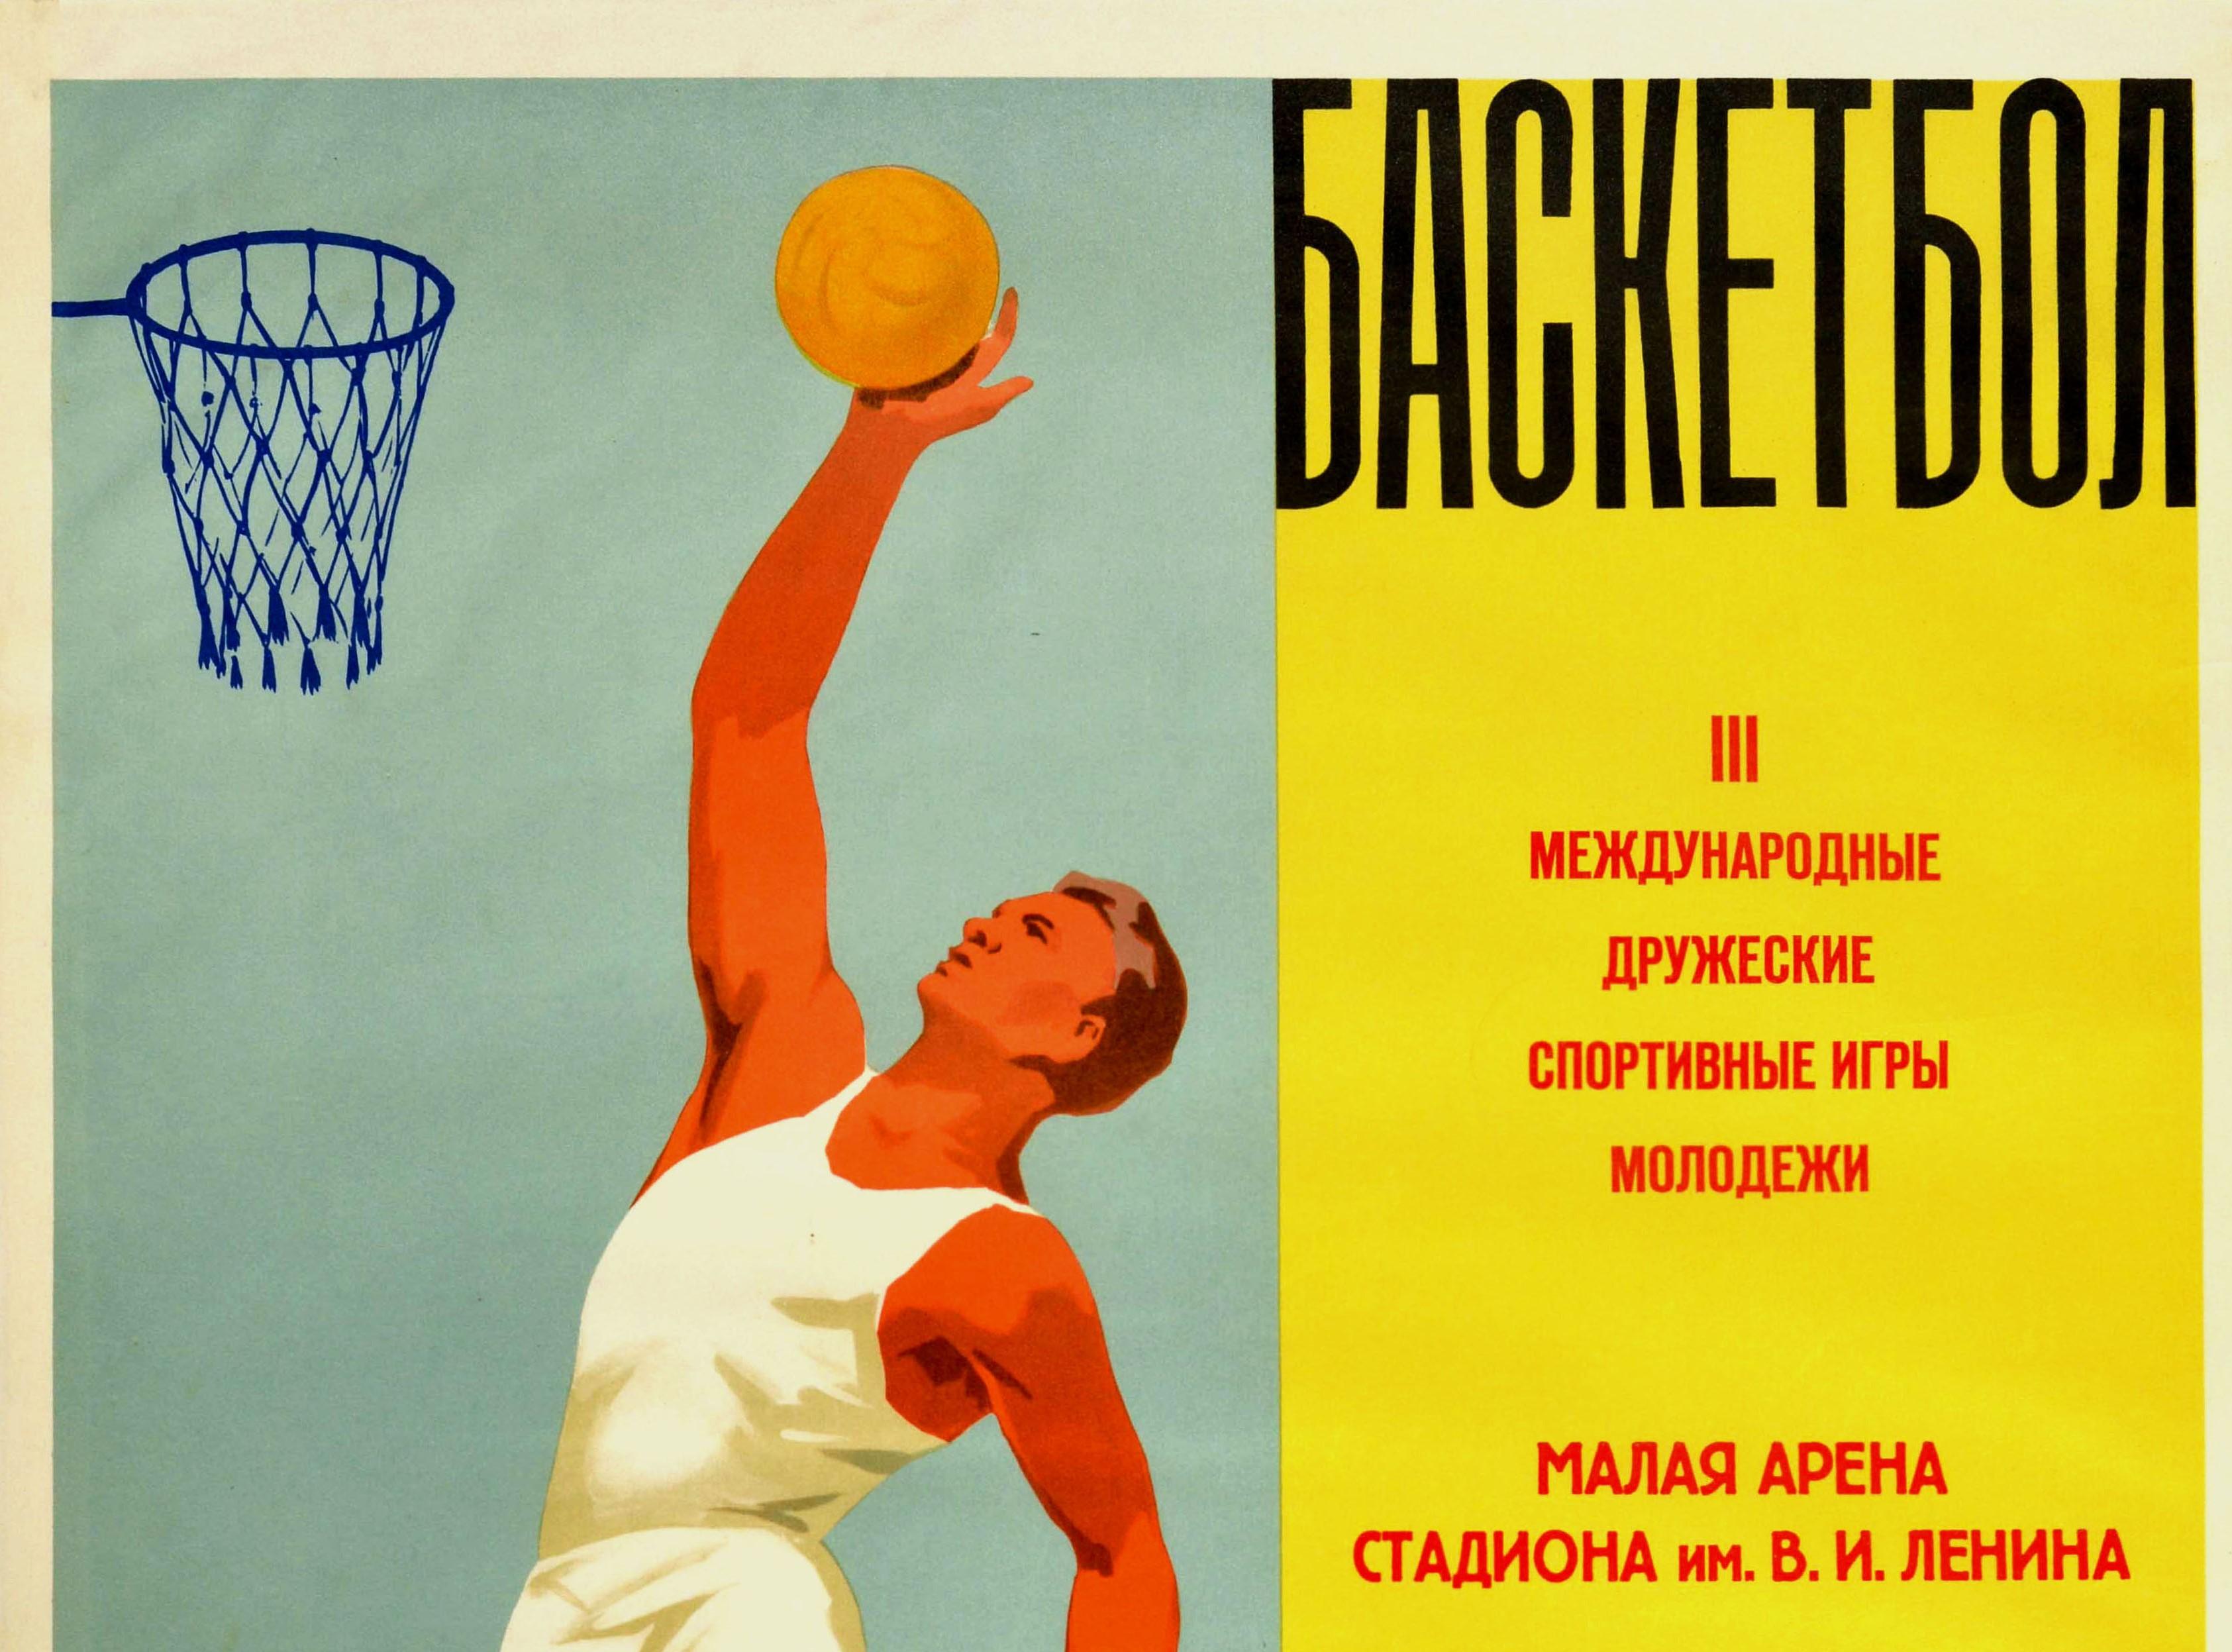 Original Vintage Poster Basketball III Friendship Moscow Youth Games USSR Sport - Print by Unknown